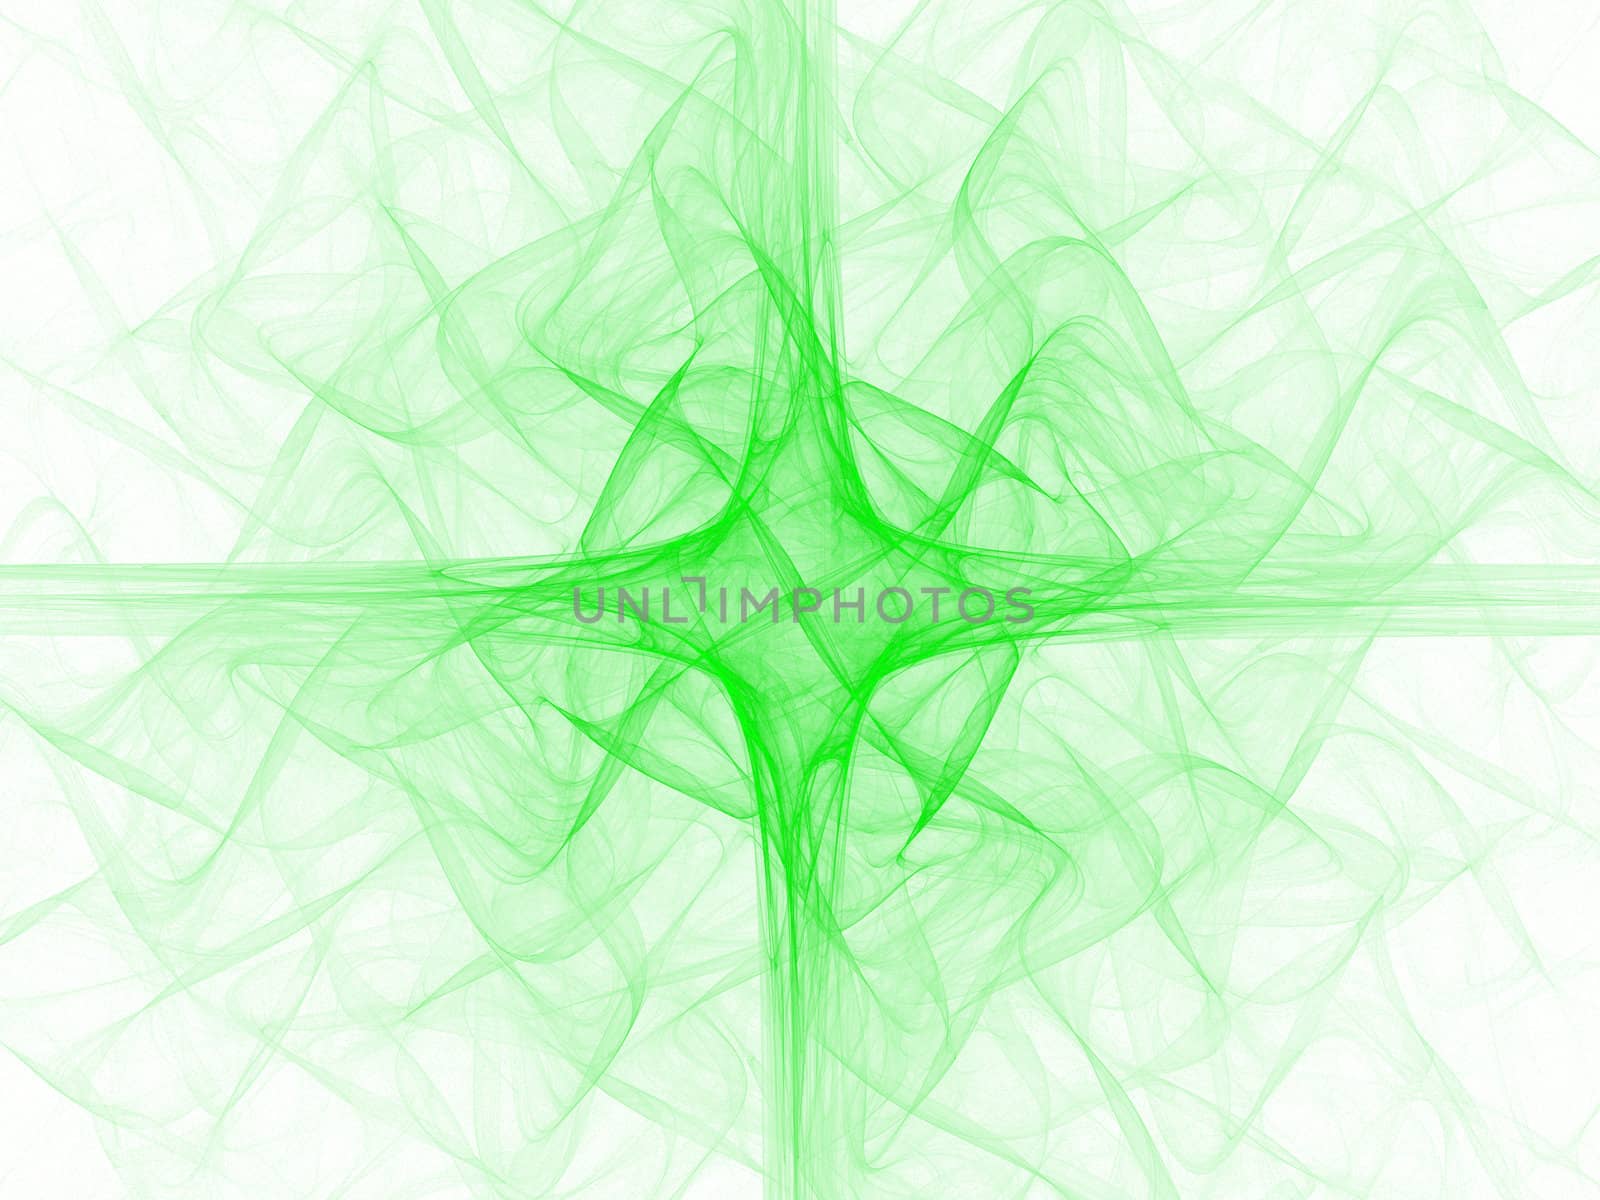 high res flame fractal forming a modern liturgical cross, keywords refer to use during church year